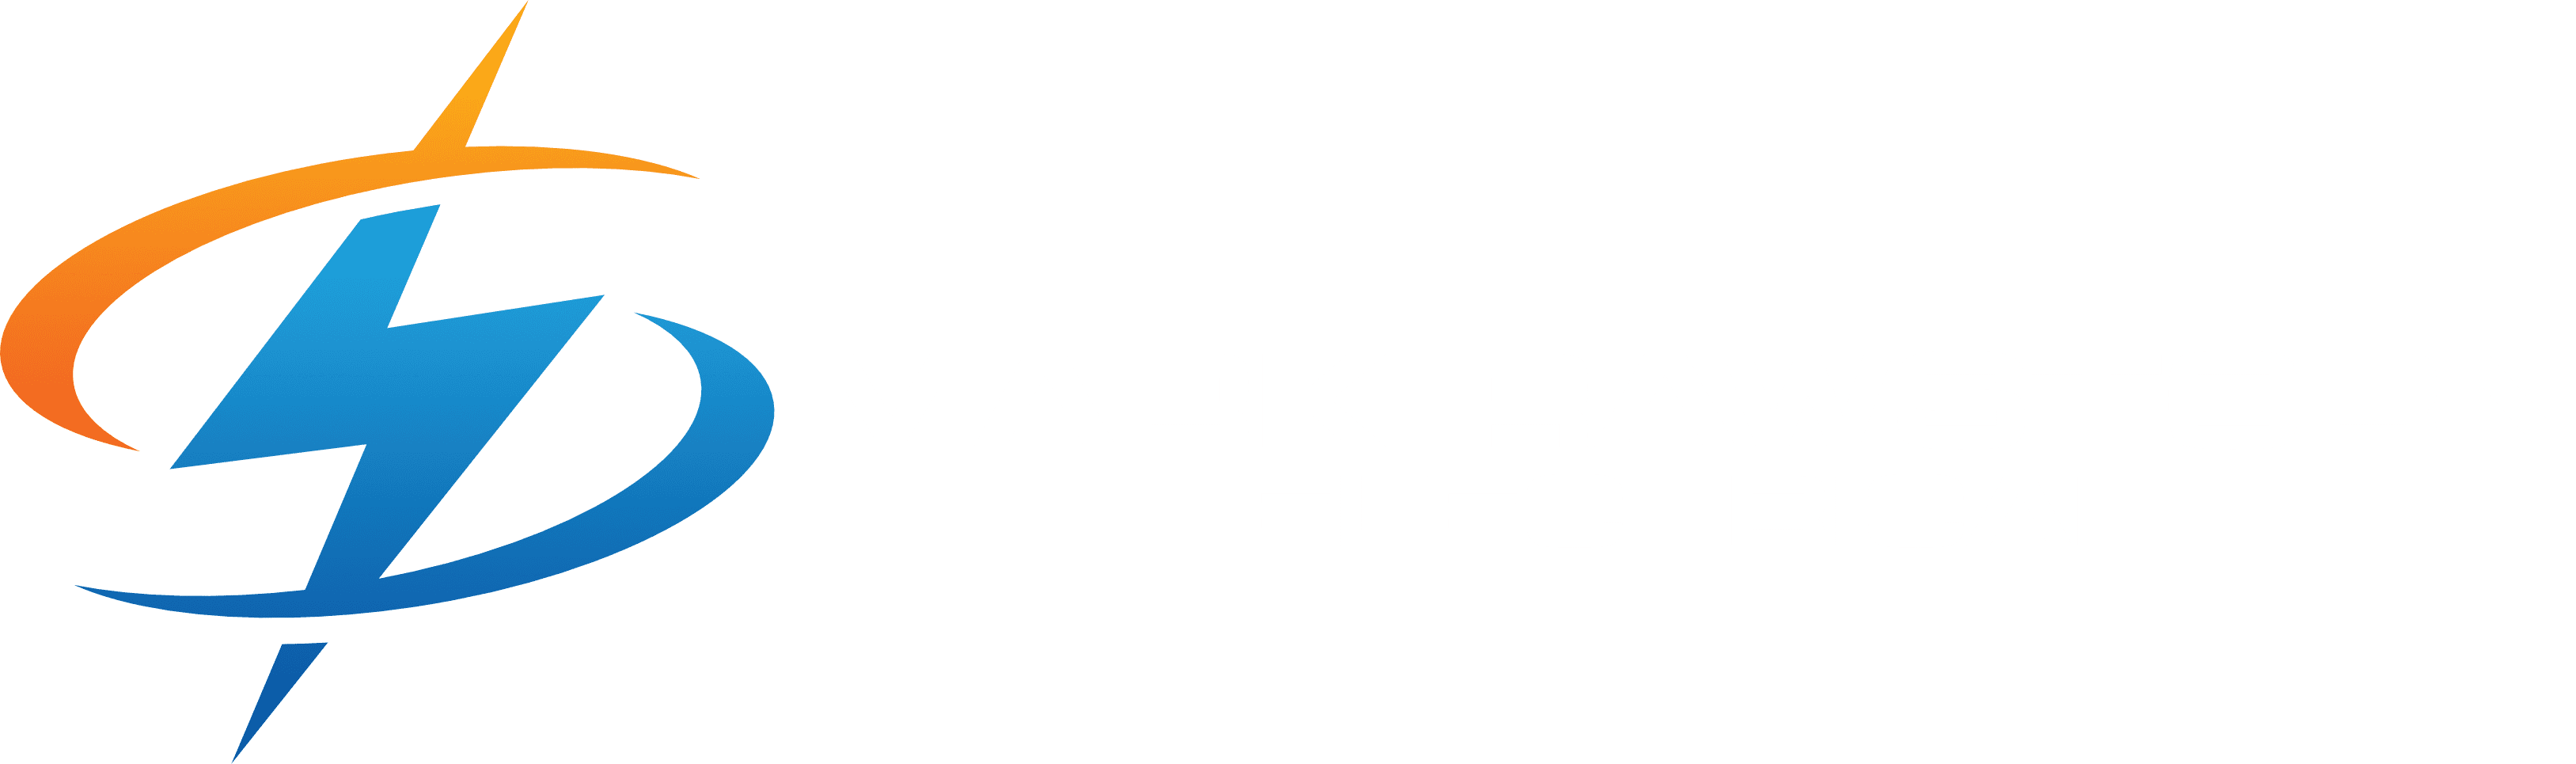 mark rawstorn logo with white letters